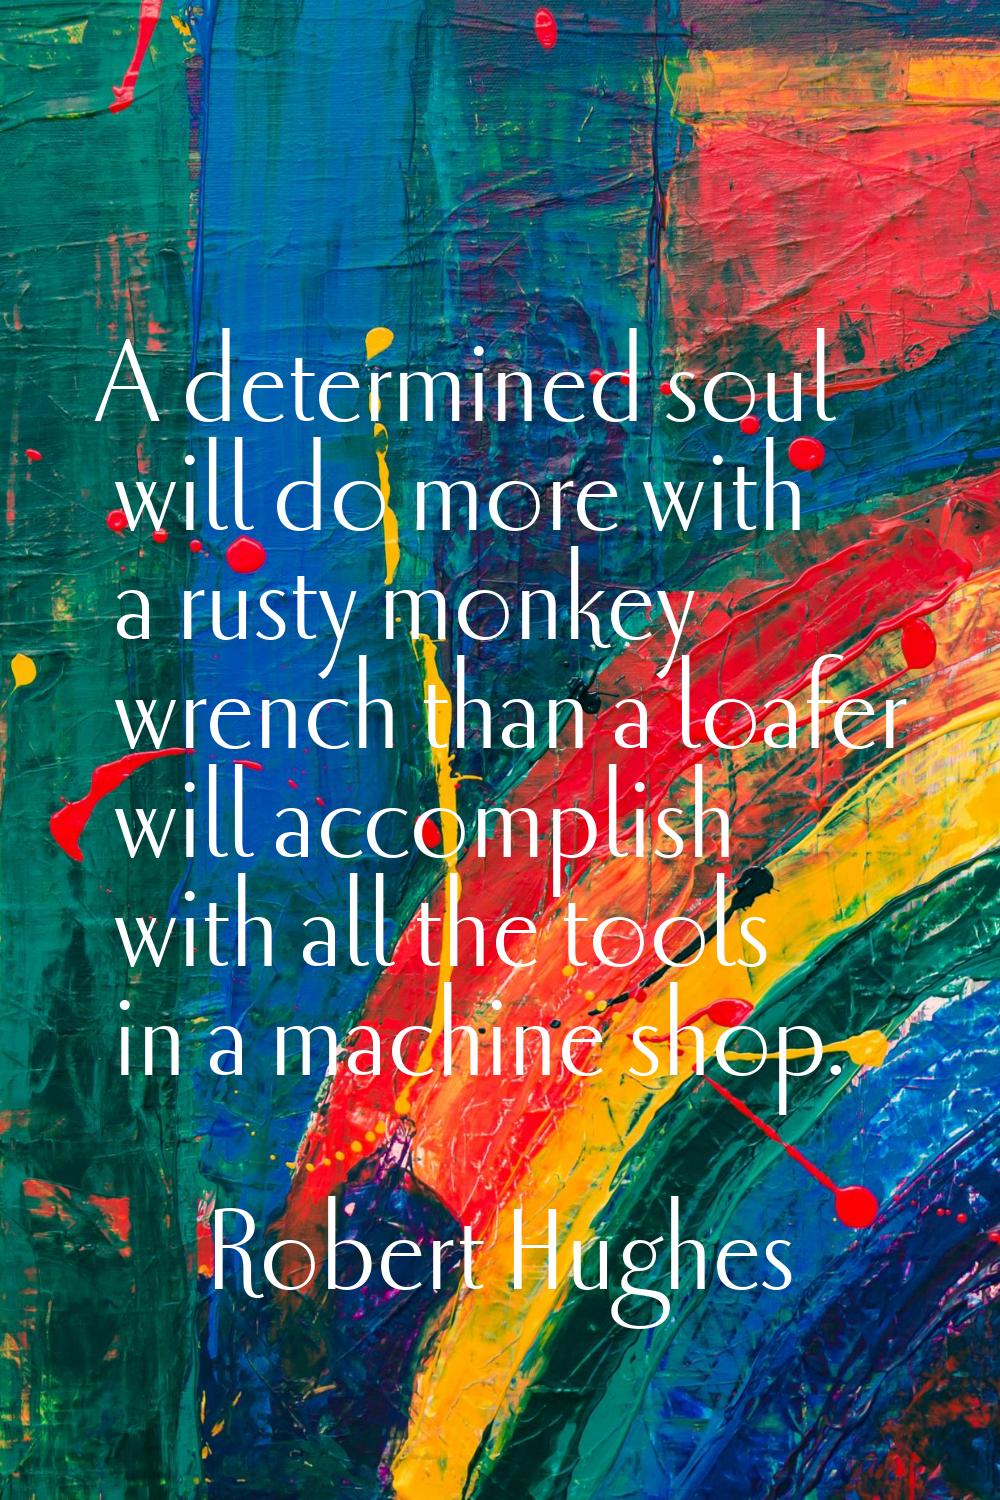 A determined soul will do more with a rusty monkey wrench than a loafer will accomplish with all th